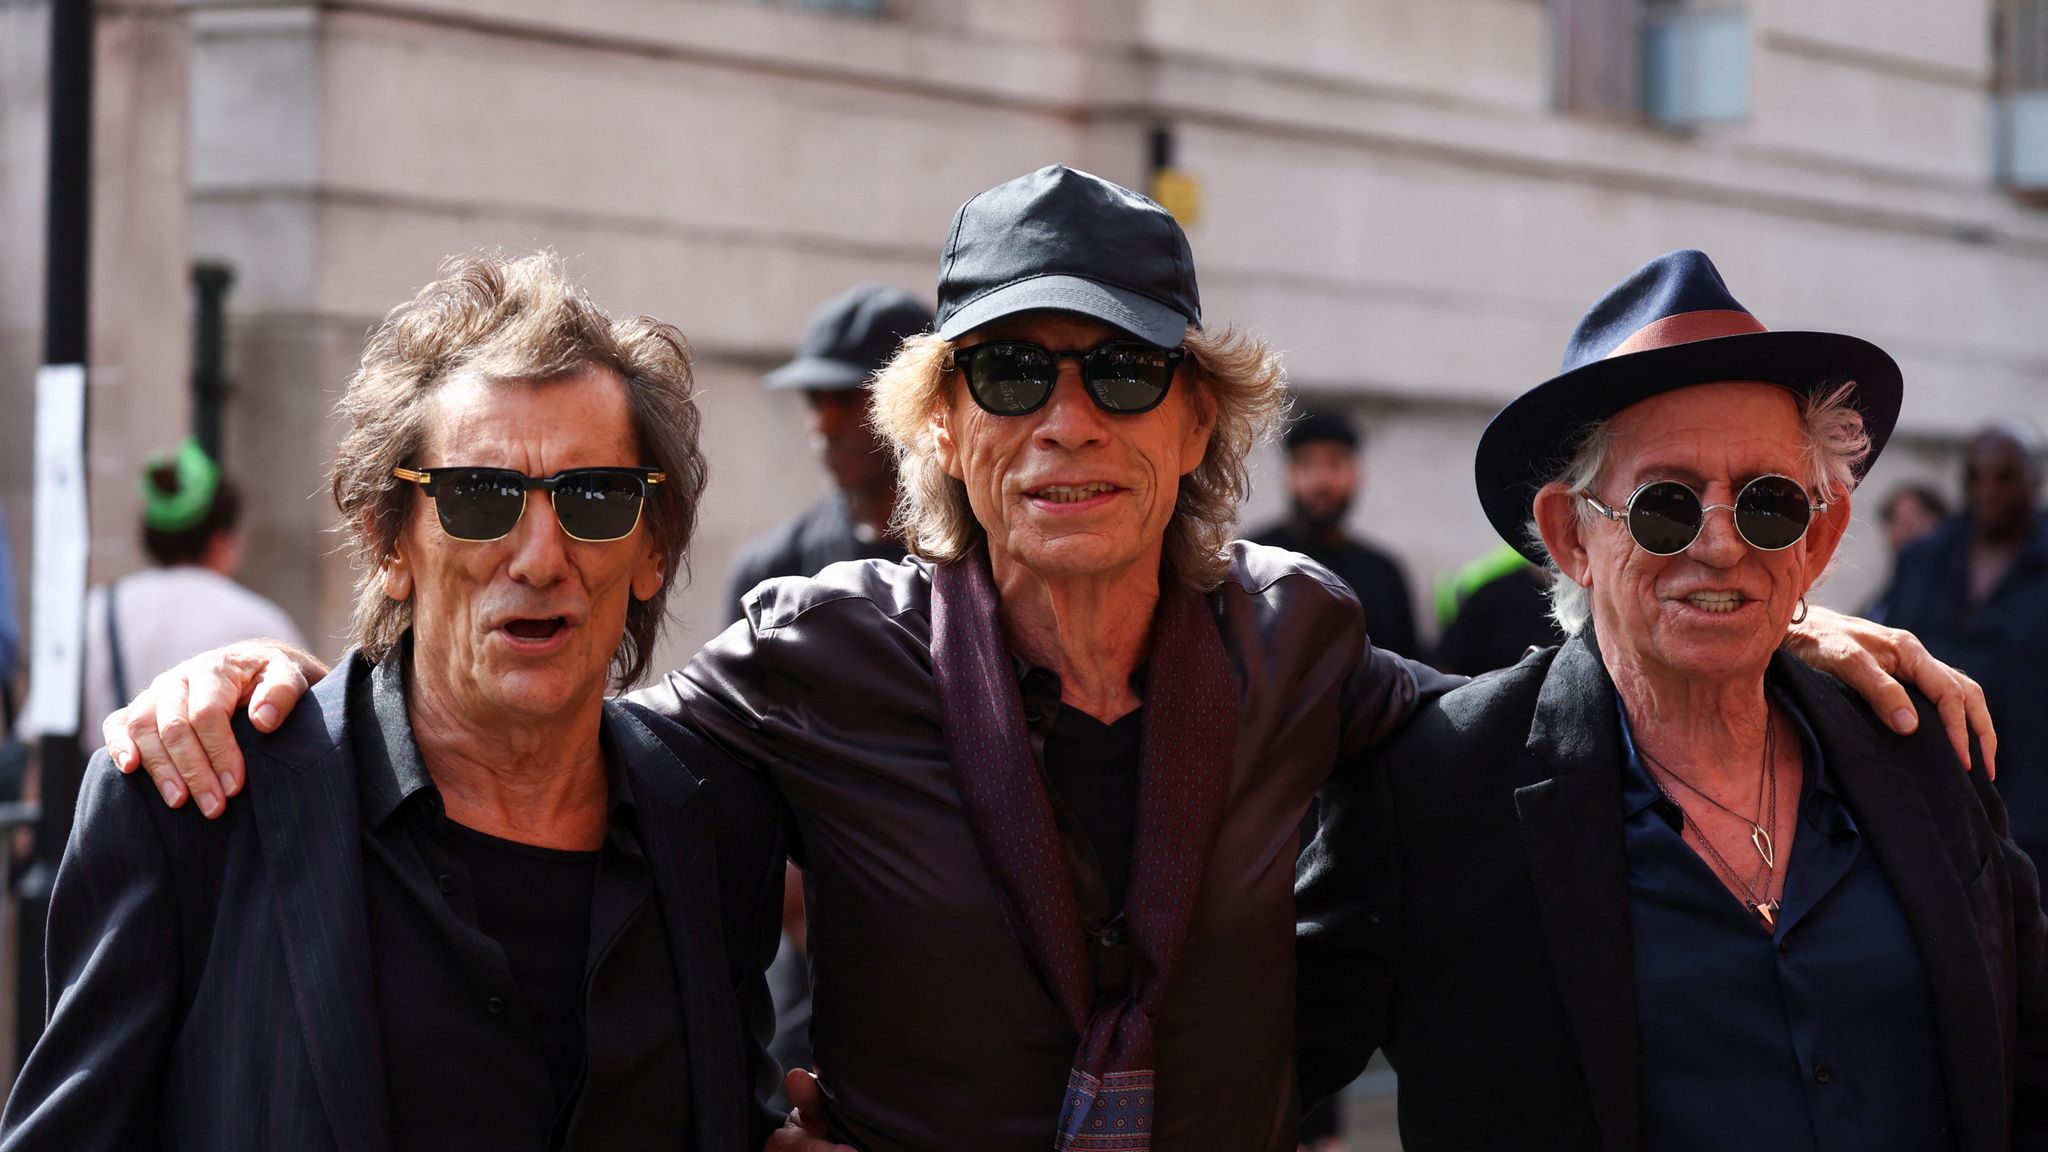 Keith Richards confirms The Rolling Stones will tour in 2024